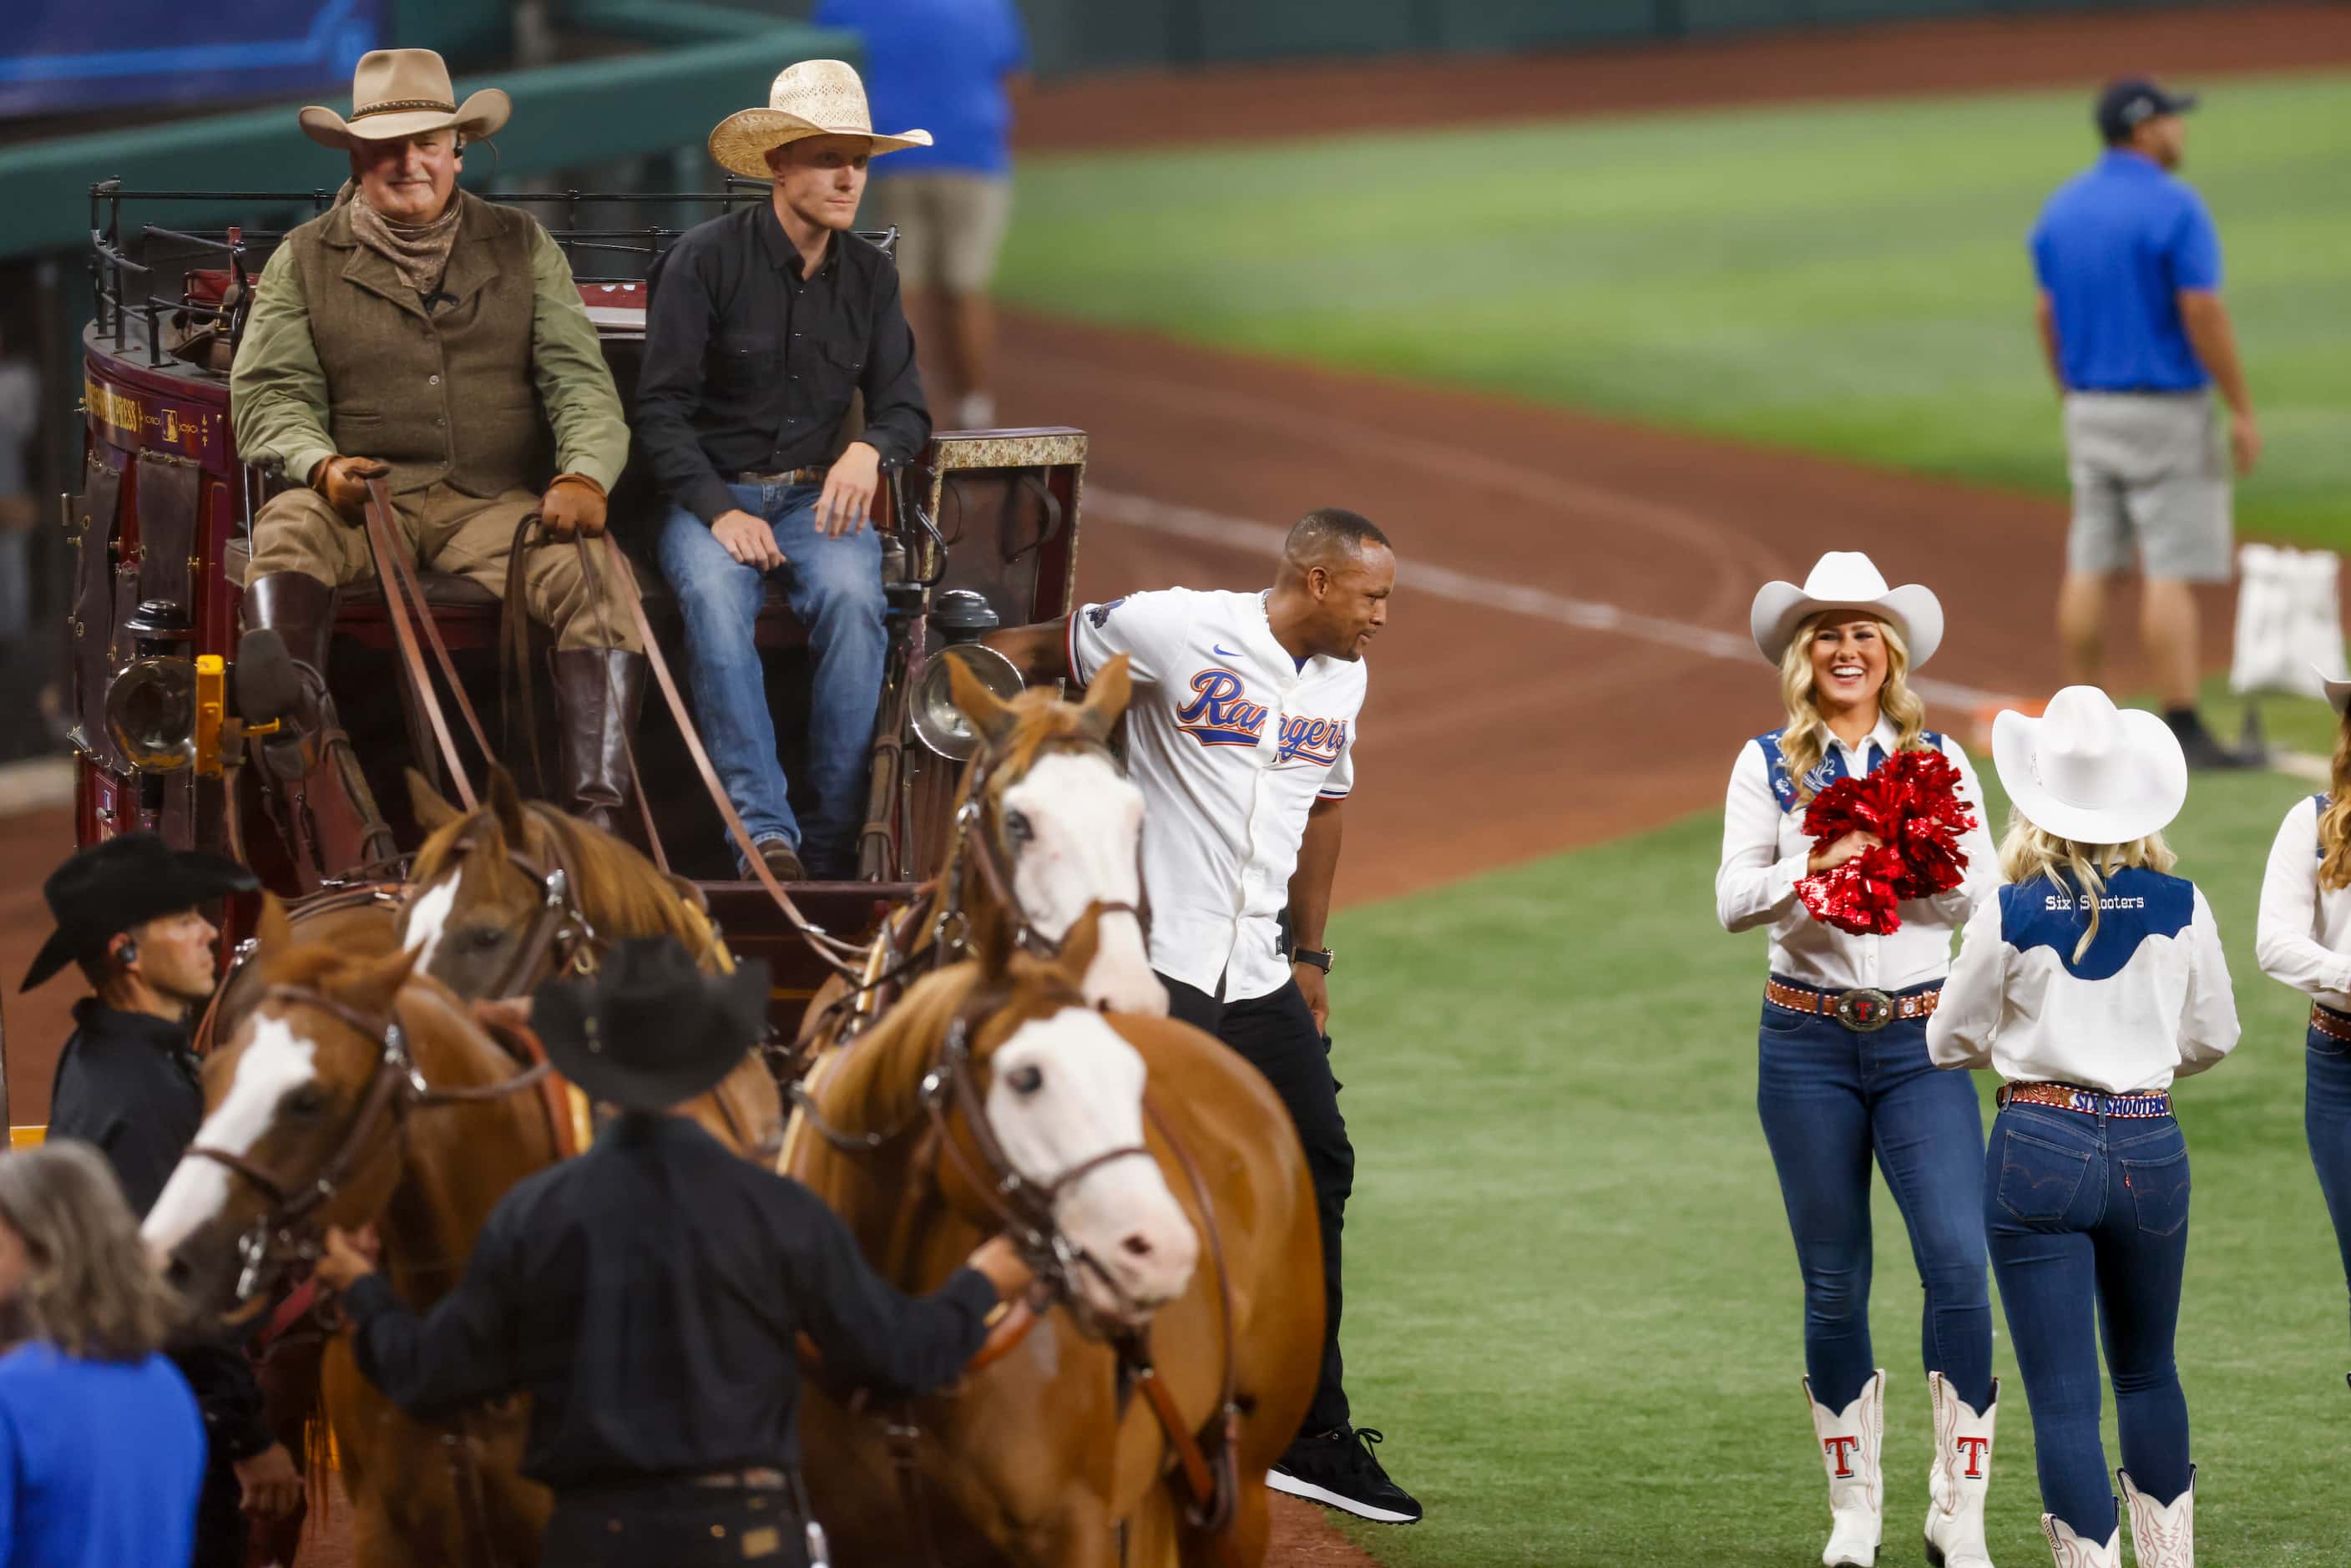 Former Texas Rangers third baseman Adrian Beltre steps out of the “Cooperstown Express”...